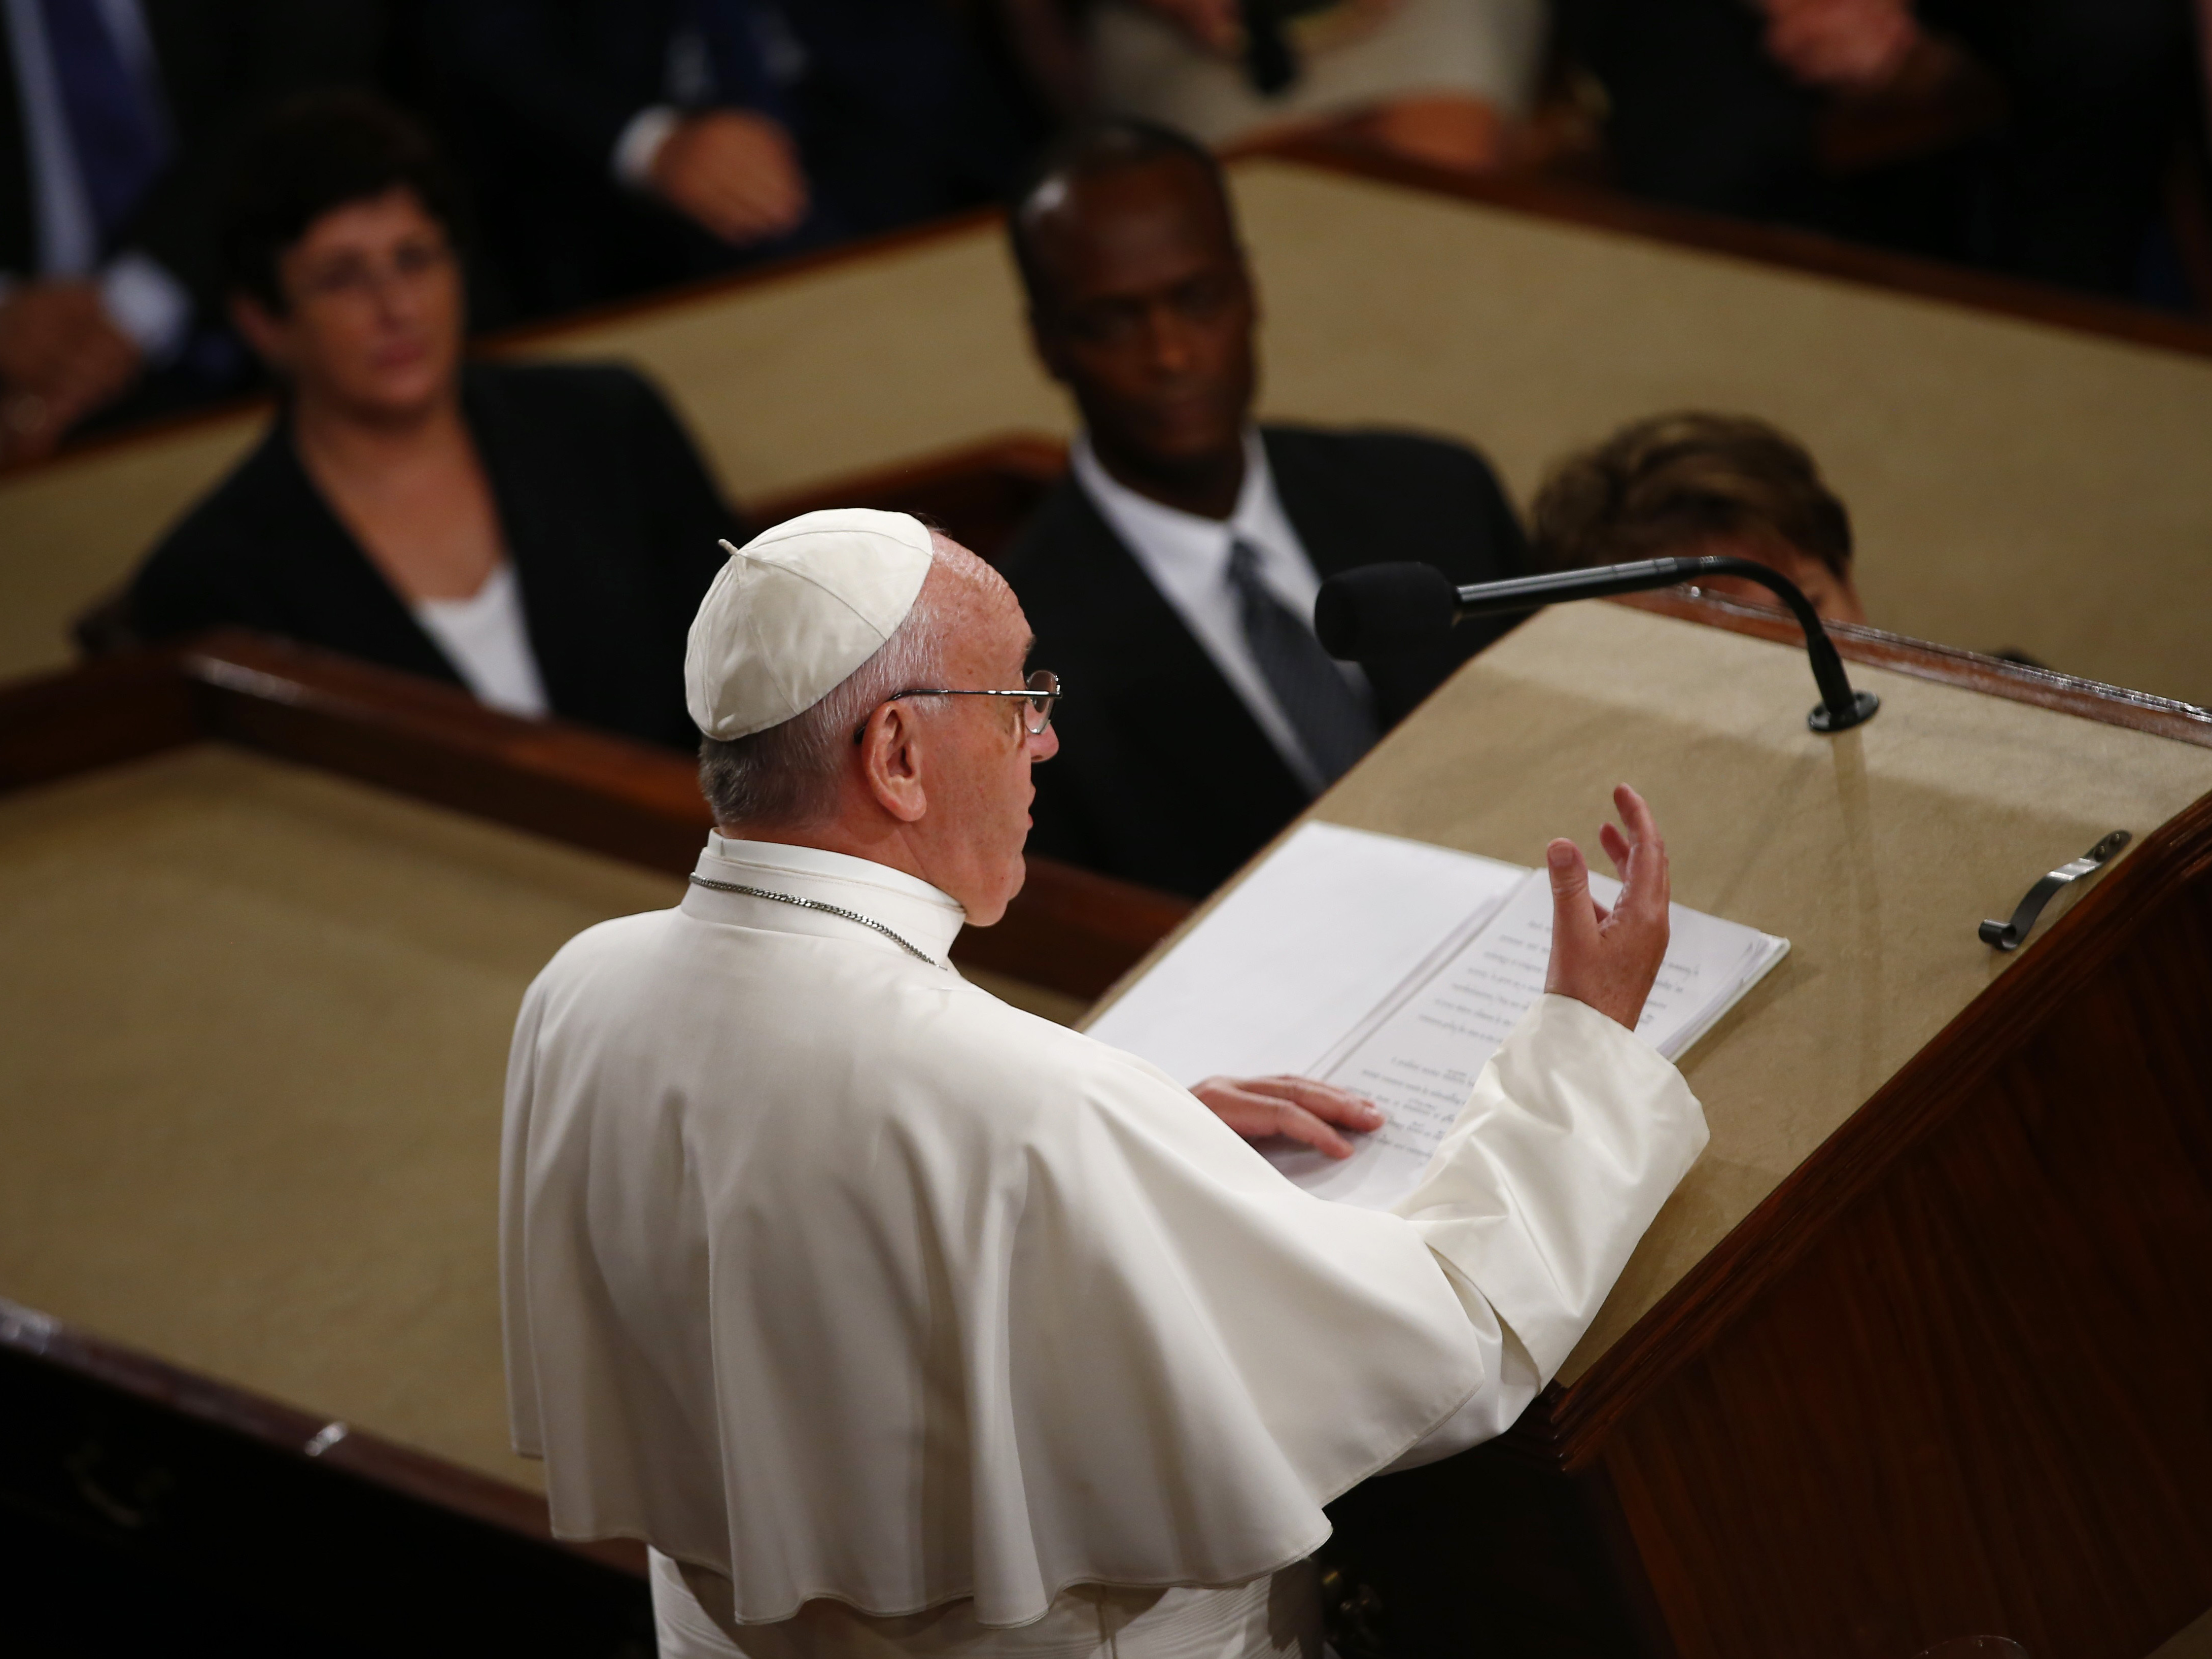 Pope Francis also strongly advocated for abolishing the death penalty, and called on Congress to act on climate change. Tony Gentile/AP